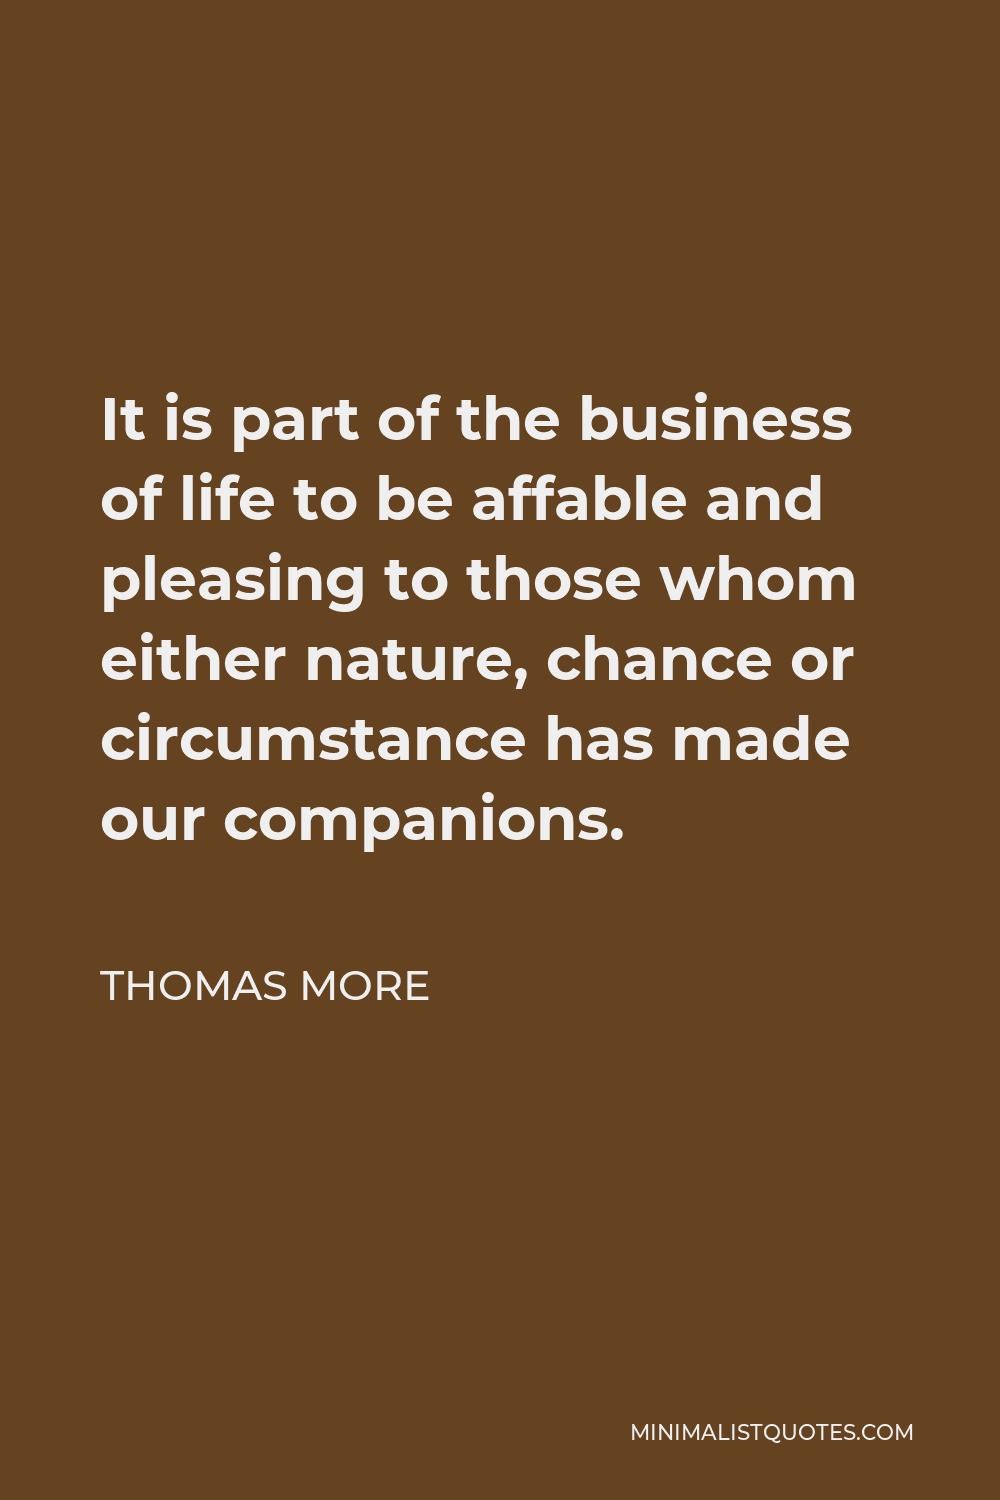 Thomas More Quote - It is part of the business of life to be affable and pleasing to those whom either nature, chance or circumstance has made our companions.